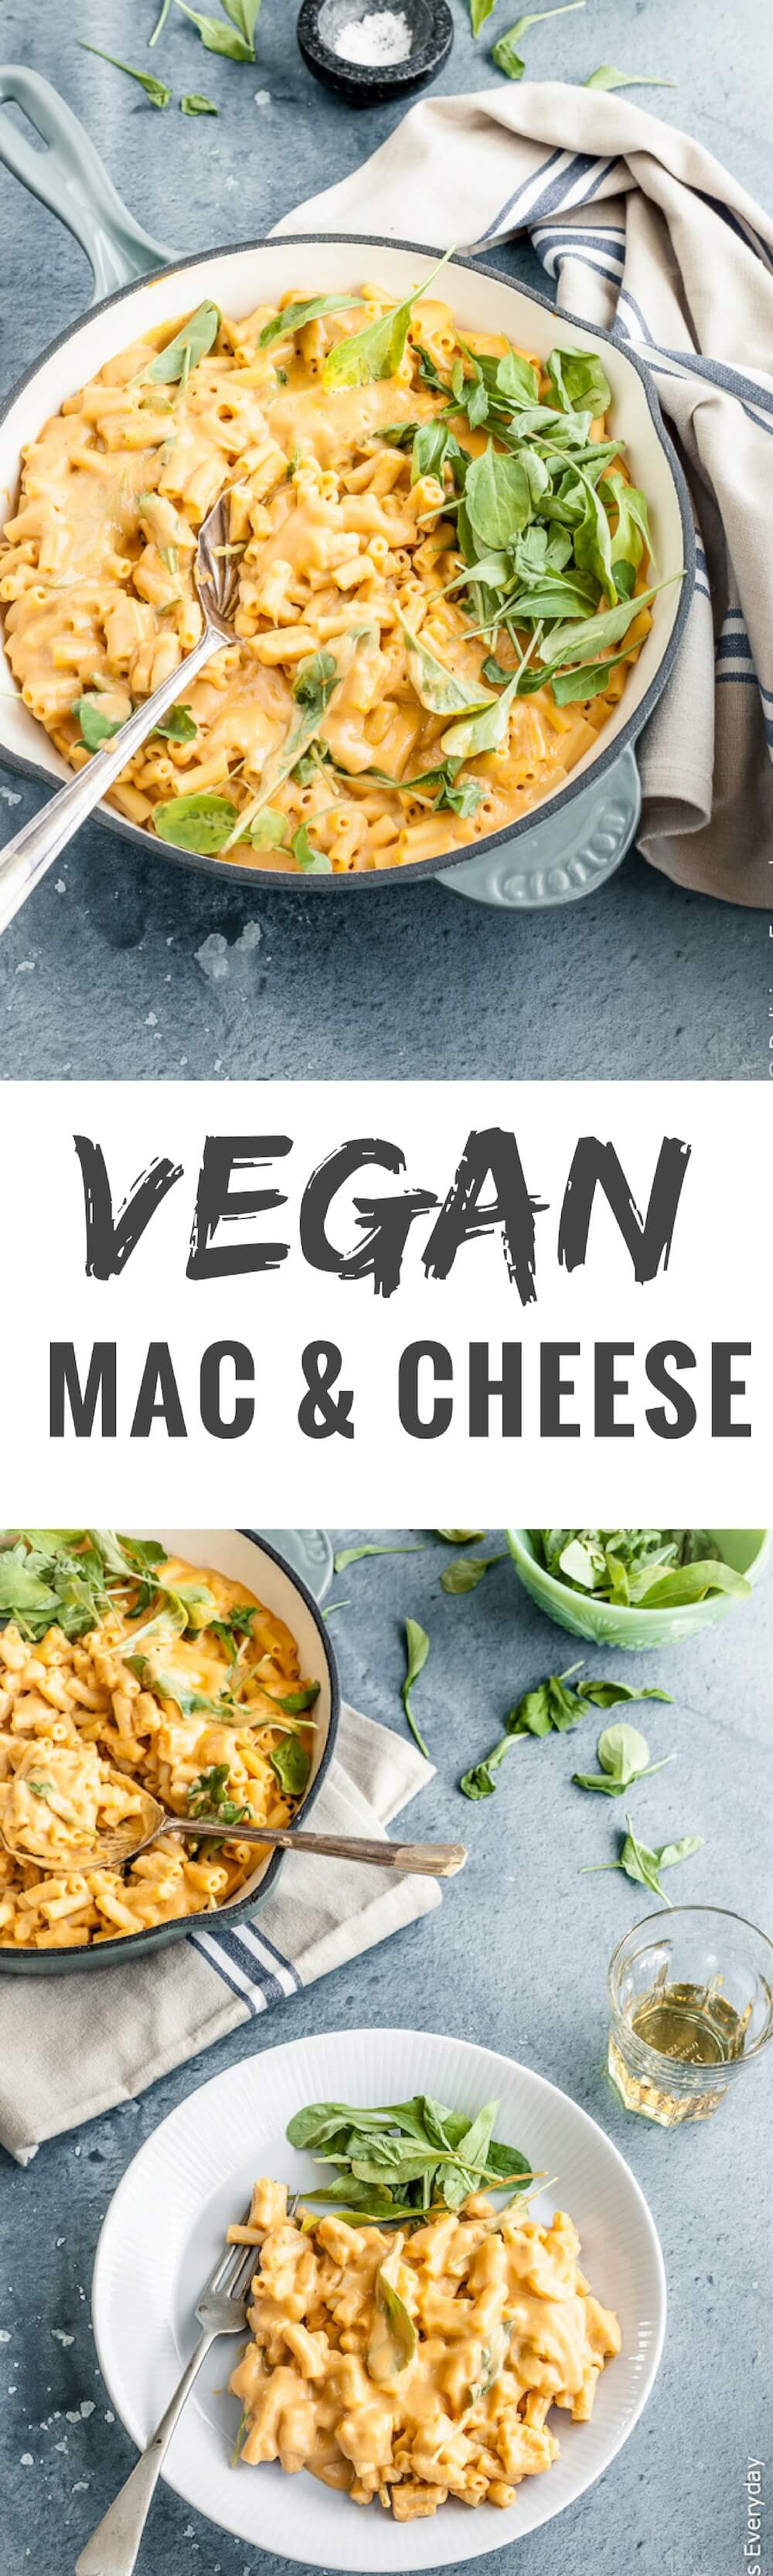 A Vegan Mac and Cheese that you don’t need to feel guilty about! This healthy cauliflower and butternut squash mac and cheese contains hidden veggies but it is so creamy and delicious that you’d never know. And it’s ready in under 30 minutes from start to finish! via @deliciouseveryday